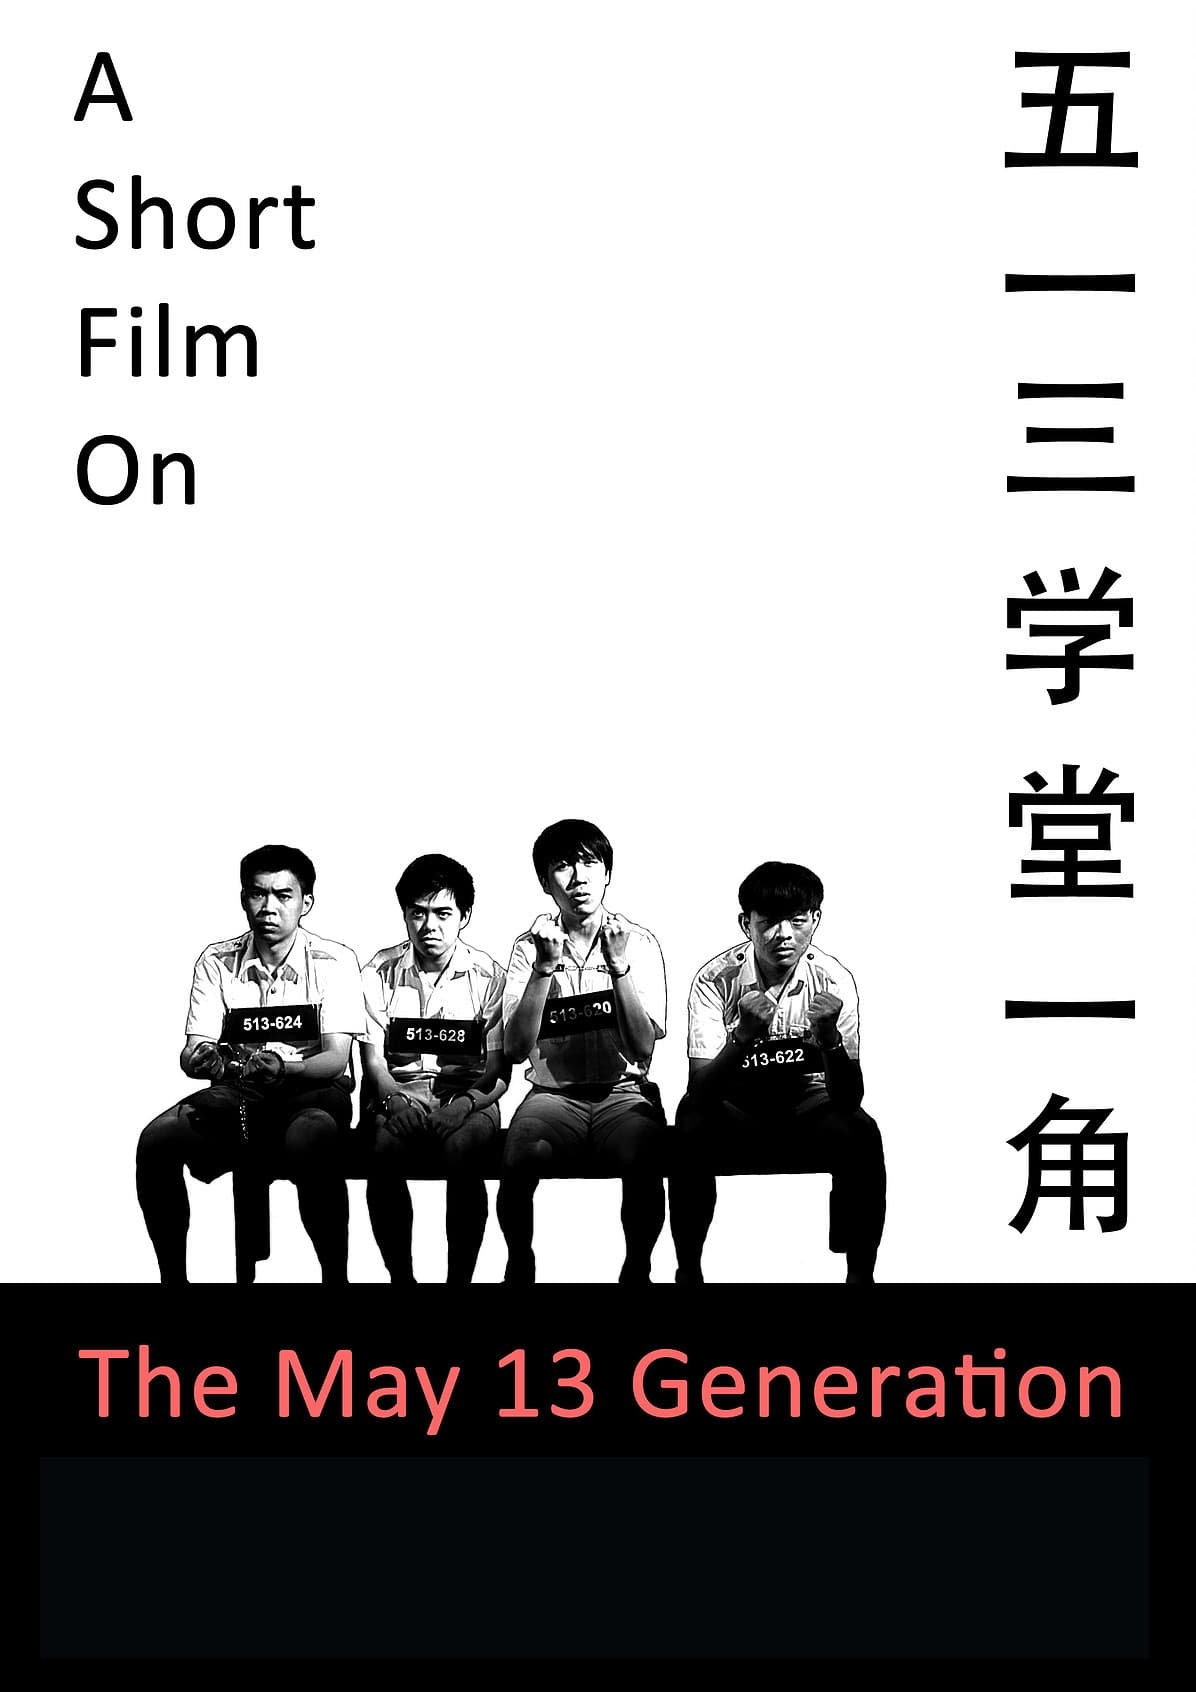 A Short Film on the May 13 Generation